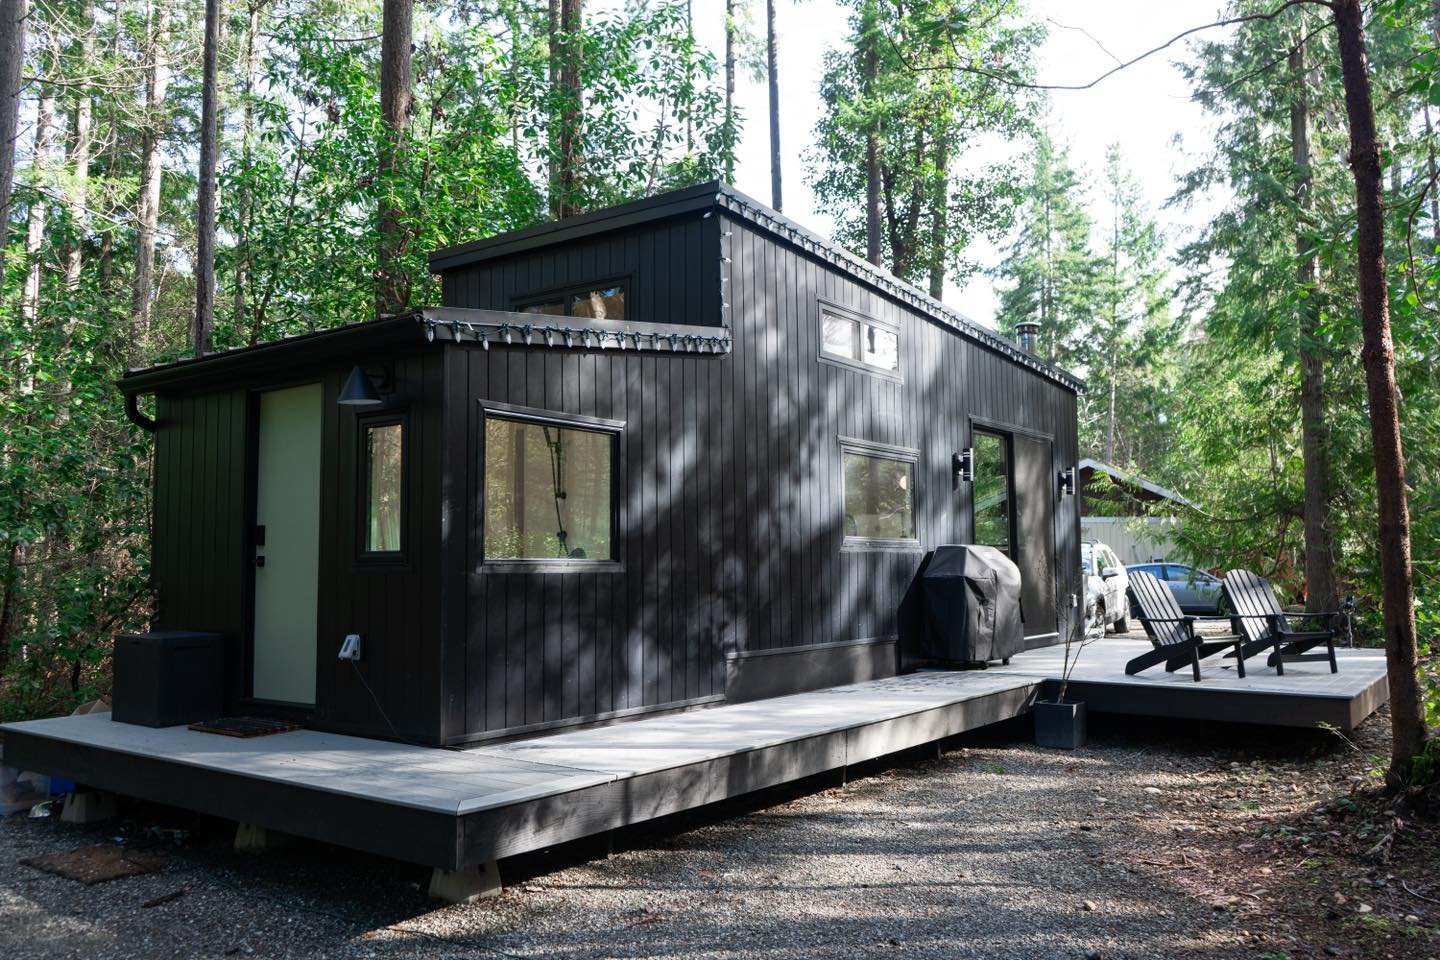 An accessory building can be a great way to utilize your property without compromising the space in your existing home.

We absolutely love a Tiny Home for your primary residence but something like is a great opportunity for a guest suite, an office 